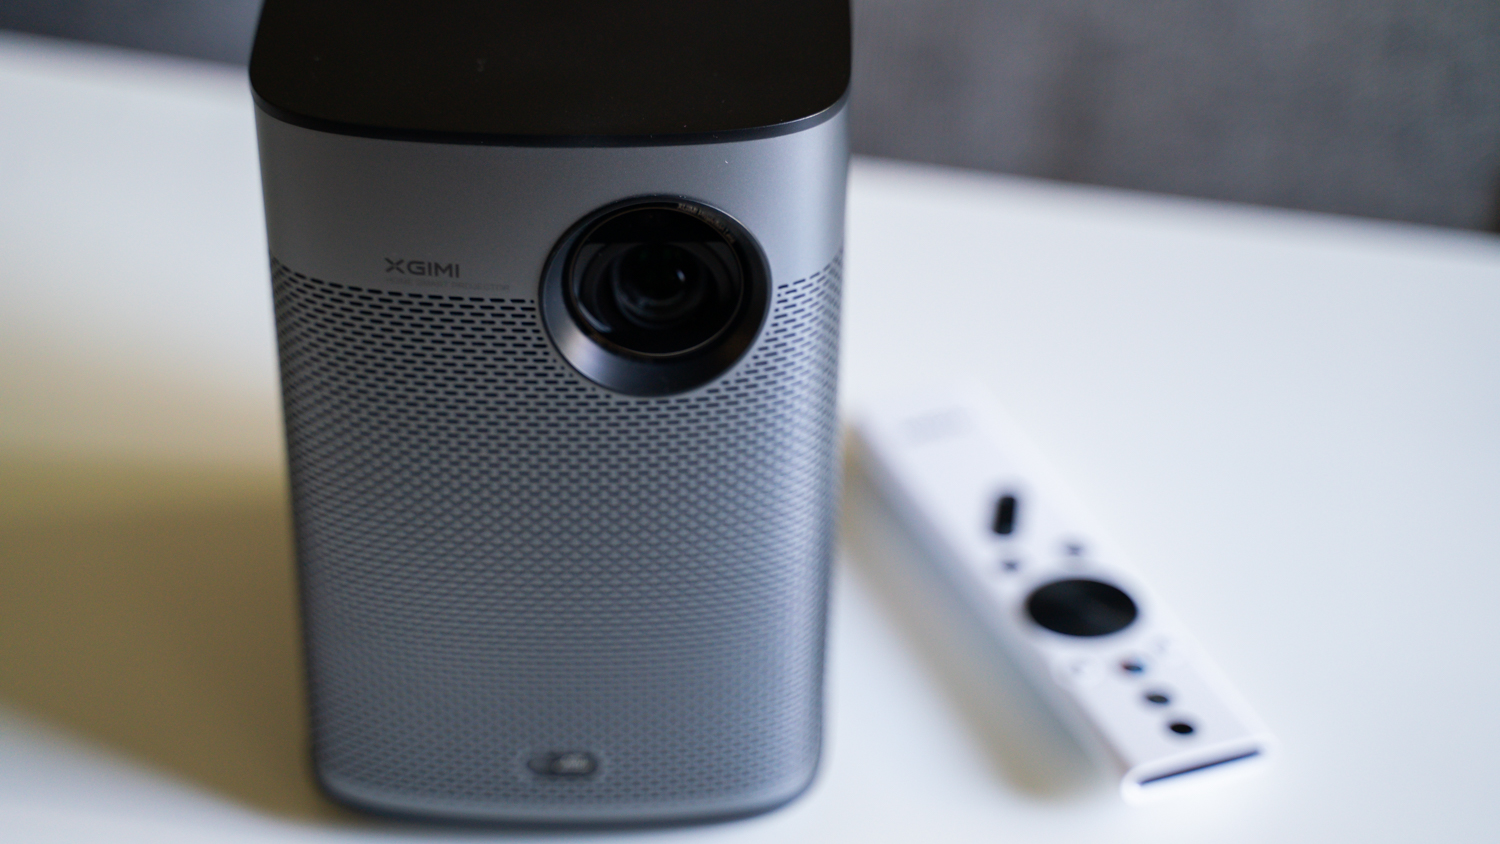 review: smart perfect projector Halo+ T3 practically a Xgimi projector smart |